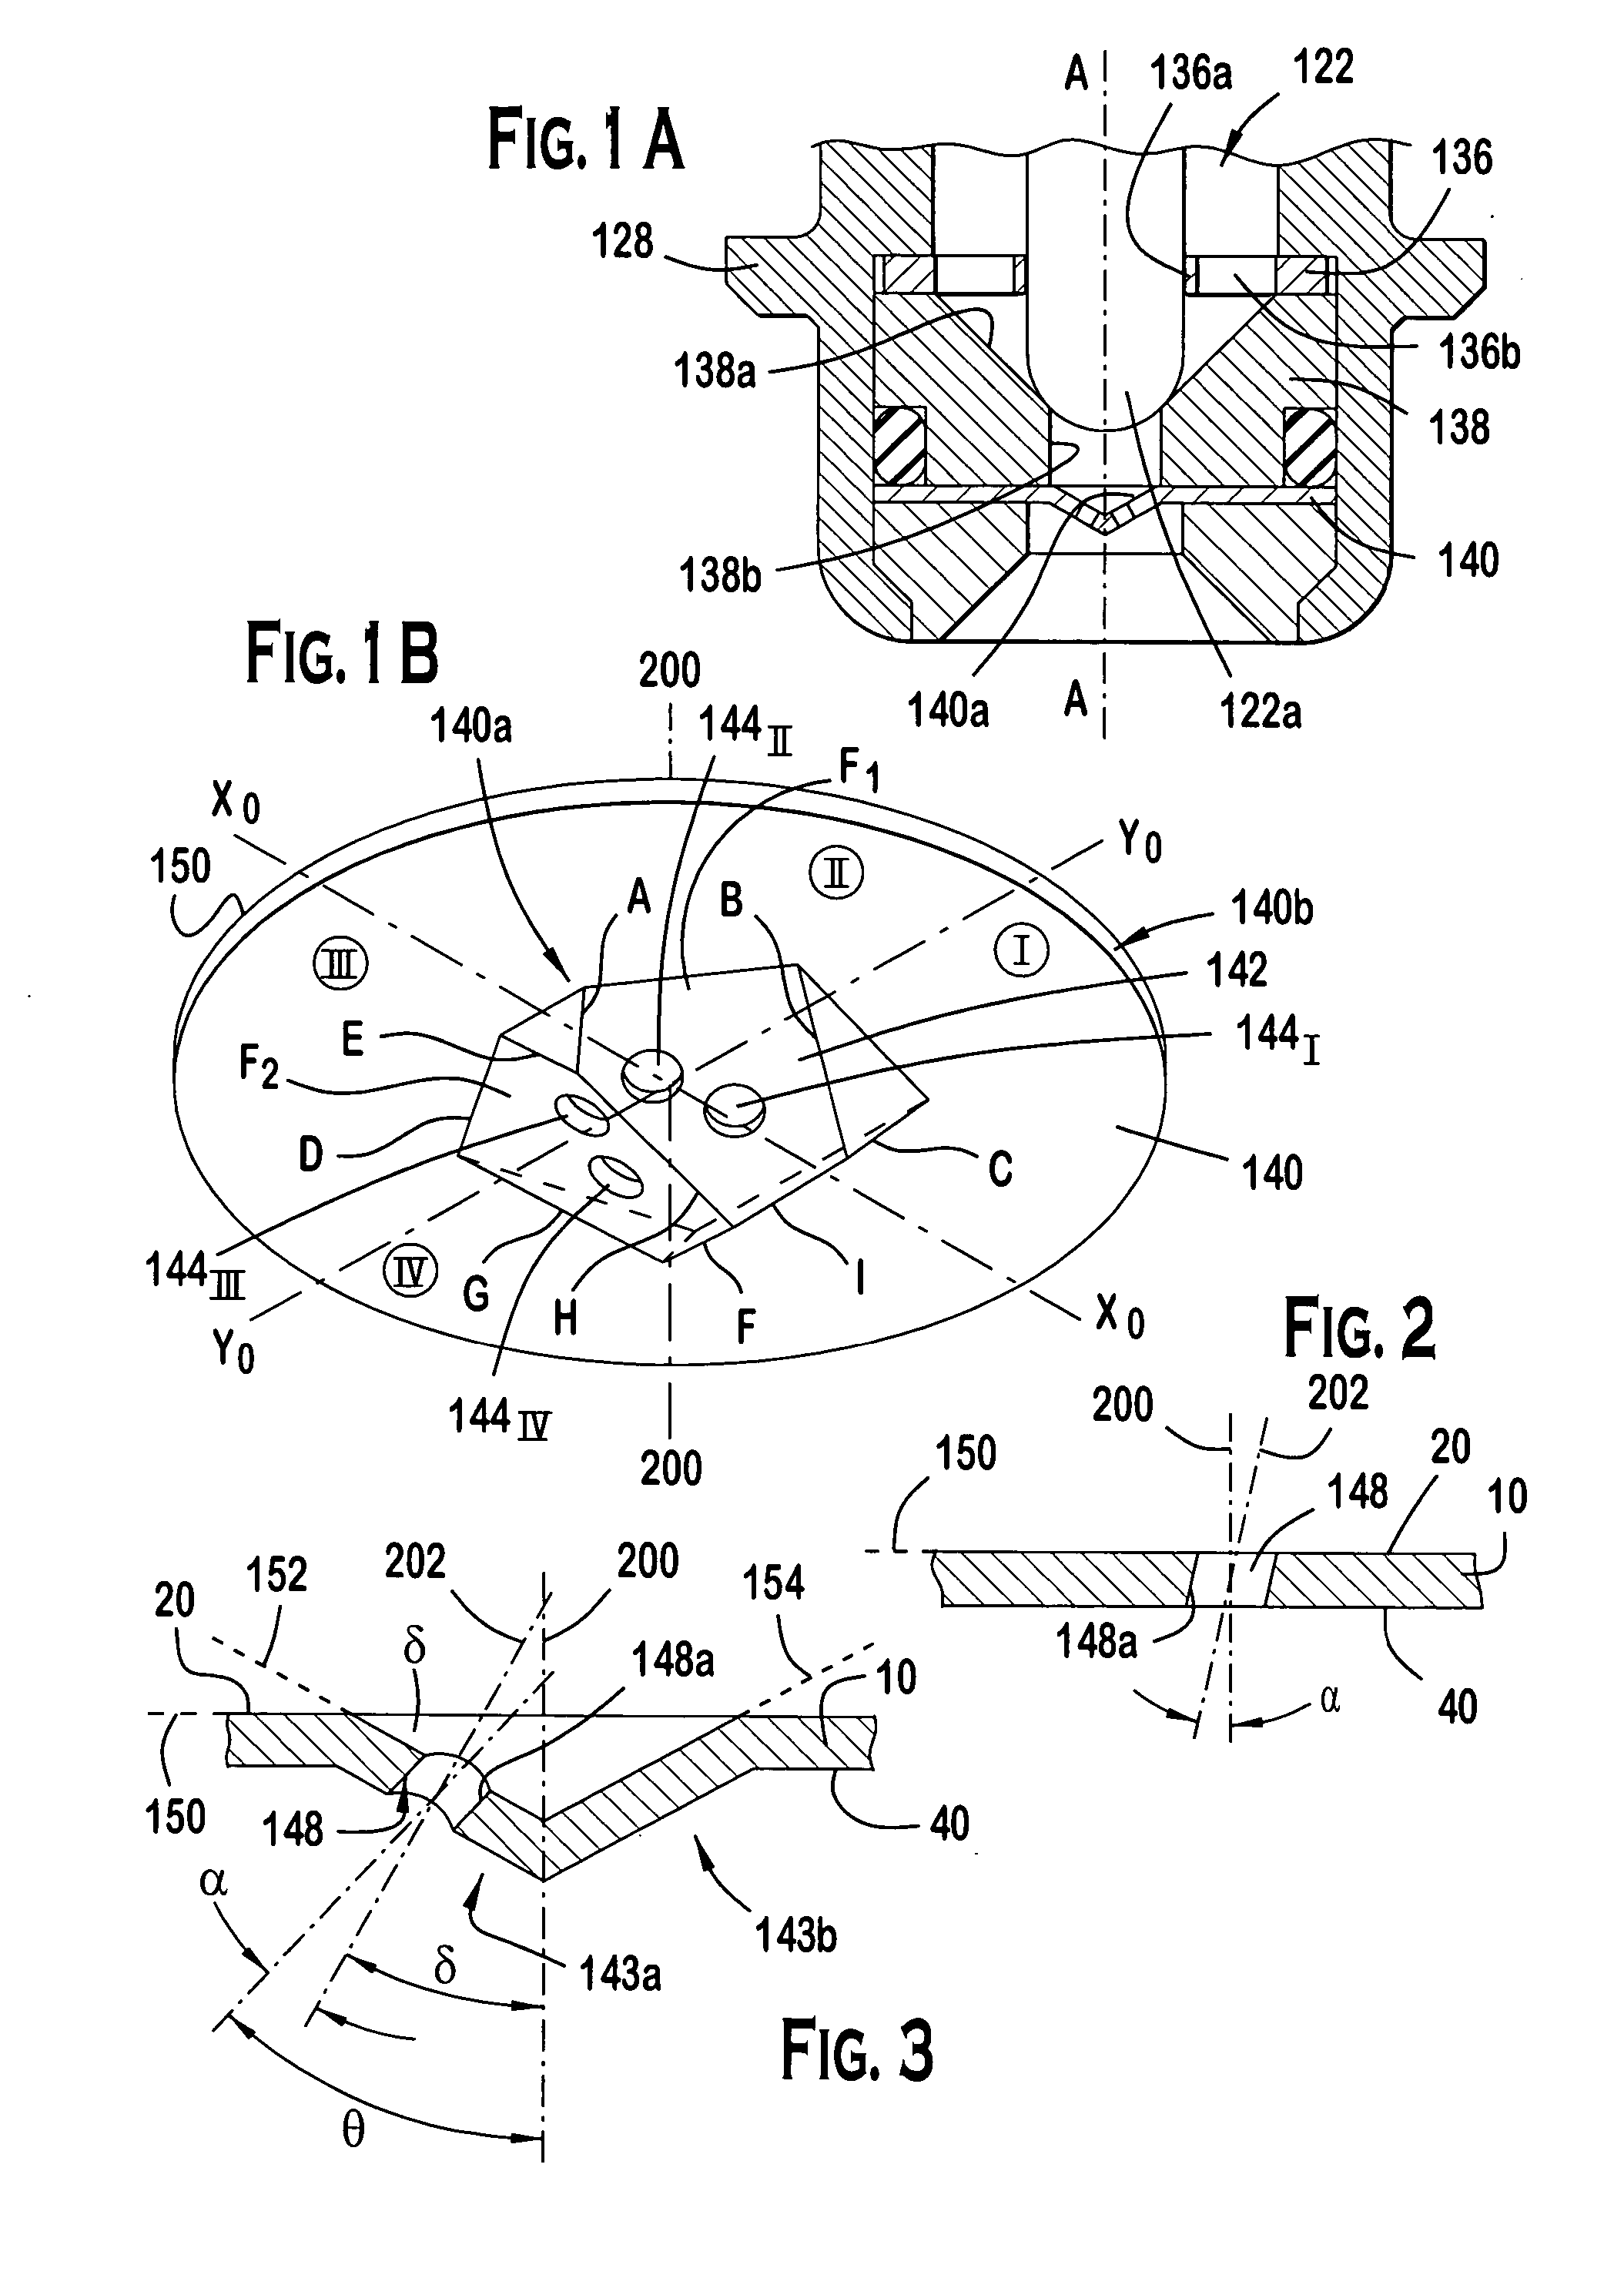 Fuel injector including a compound angle orifice disc for adjusting spray targeting